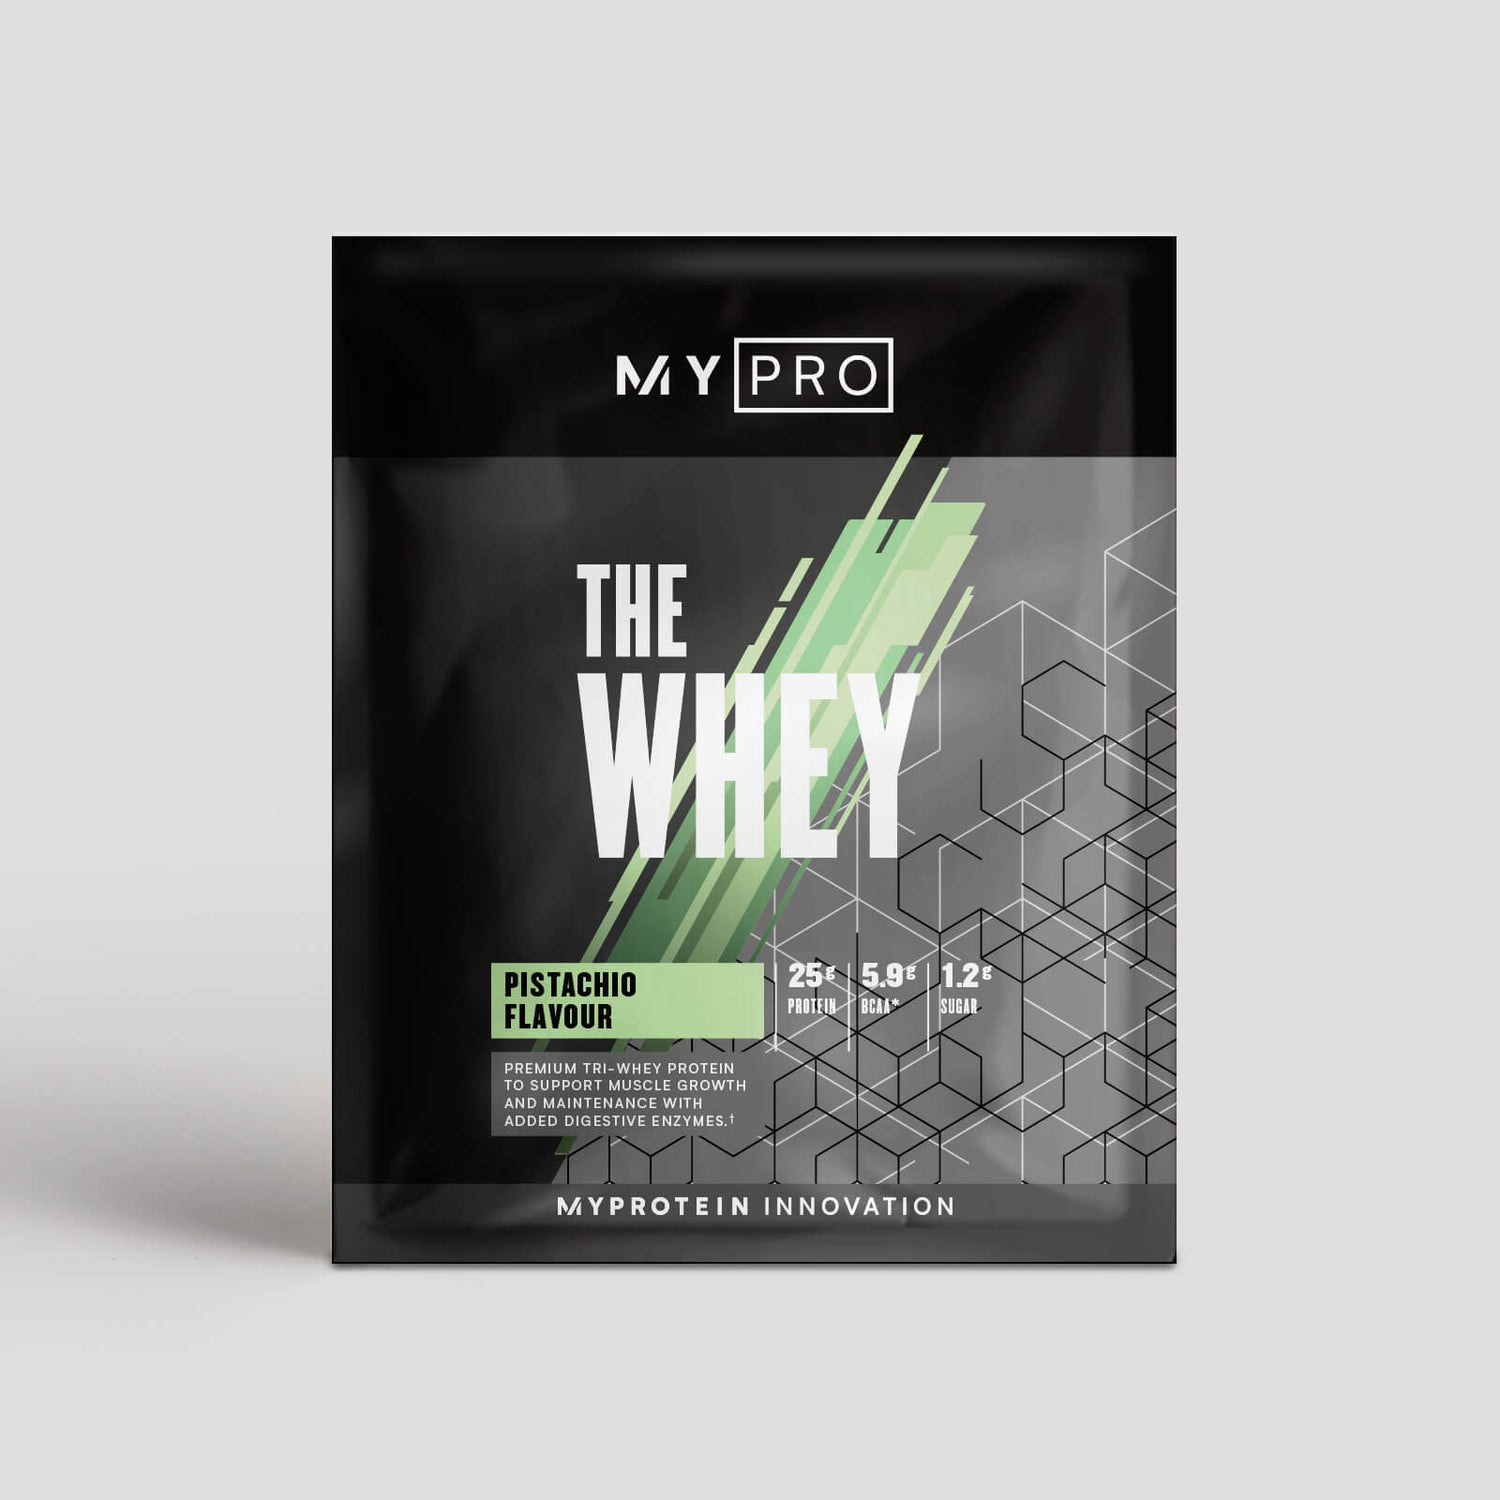 THE Whey – Pistagesmak (smakprov)